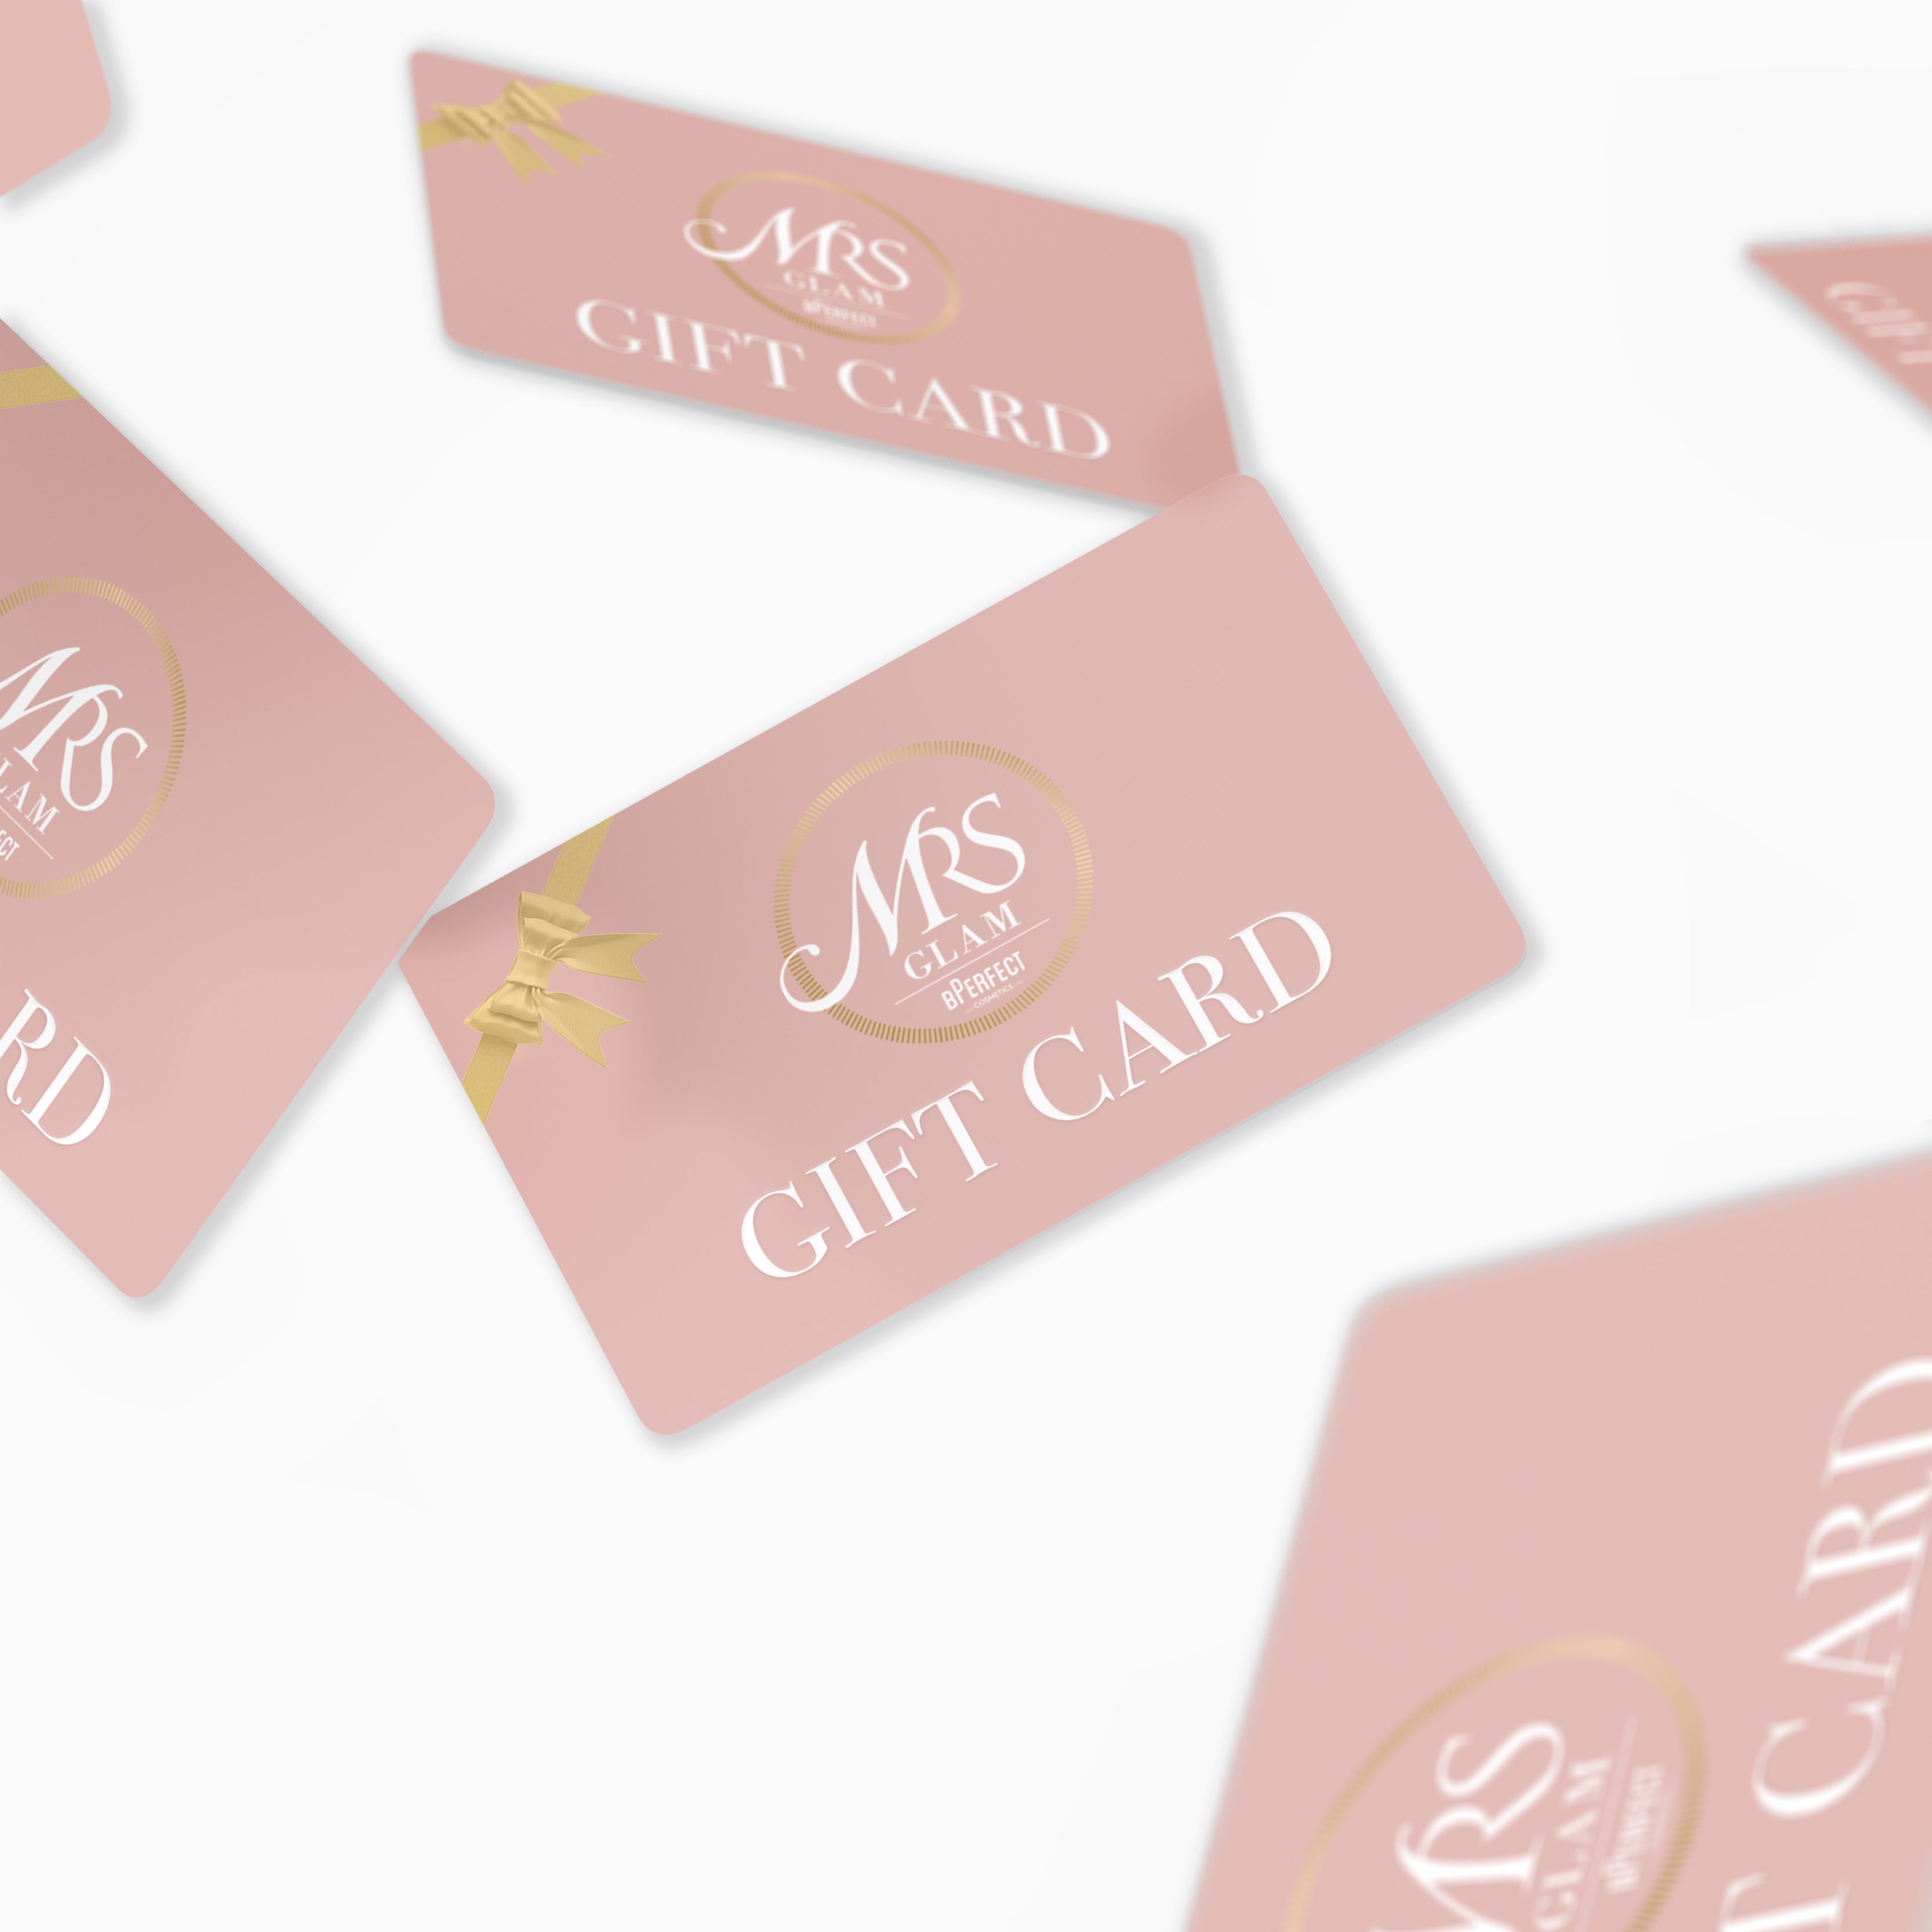 Glam Boutique Gift Card